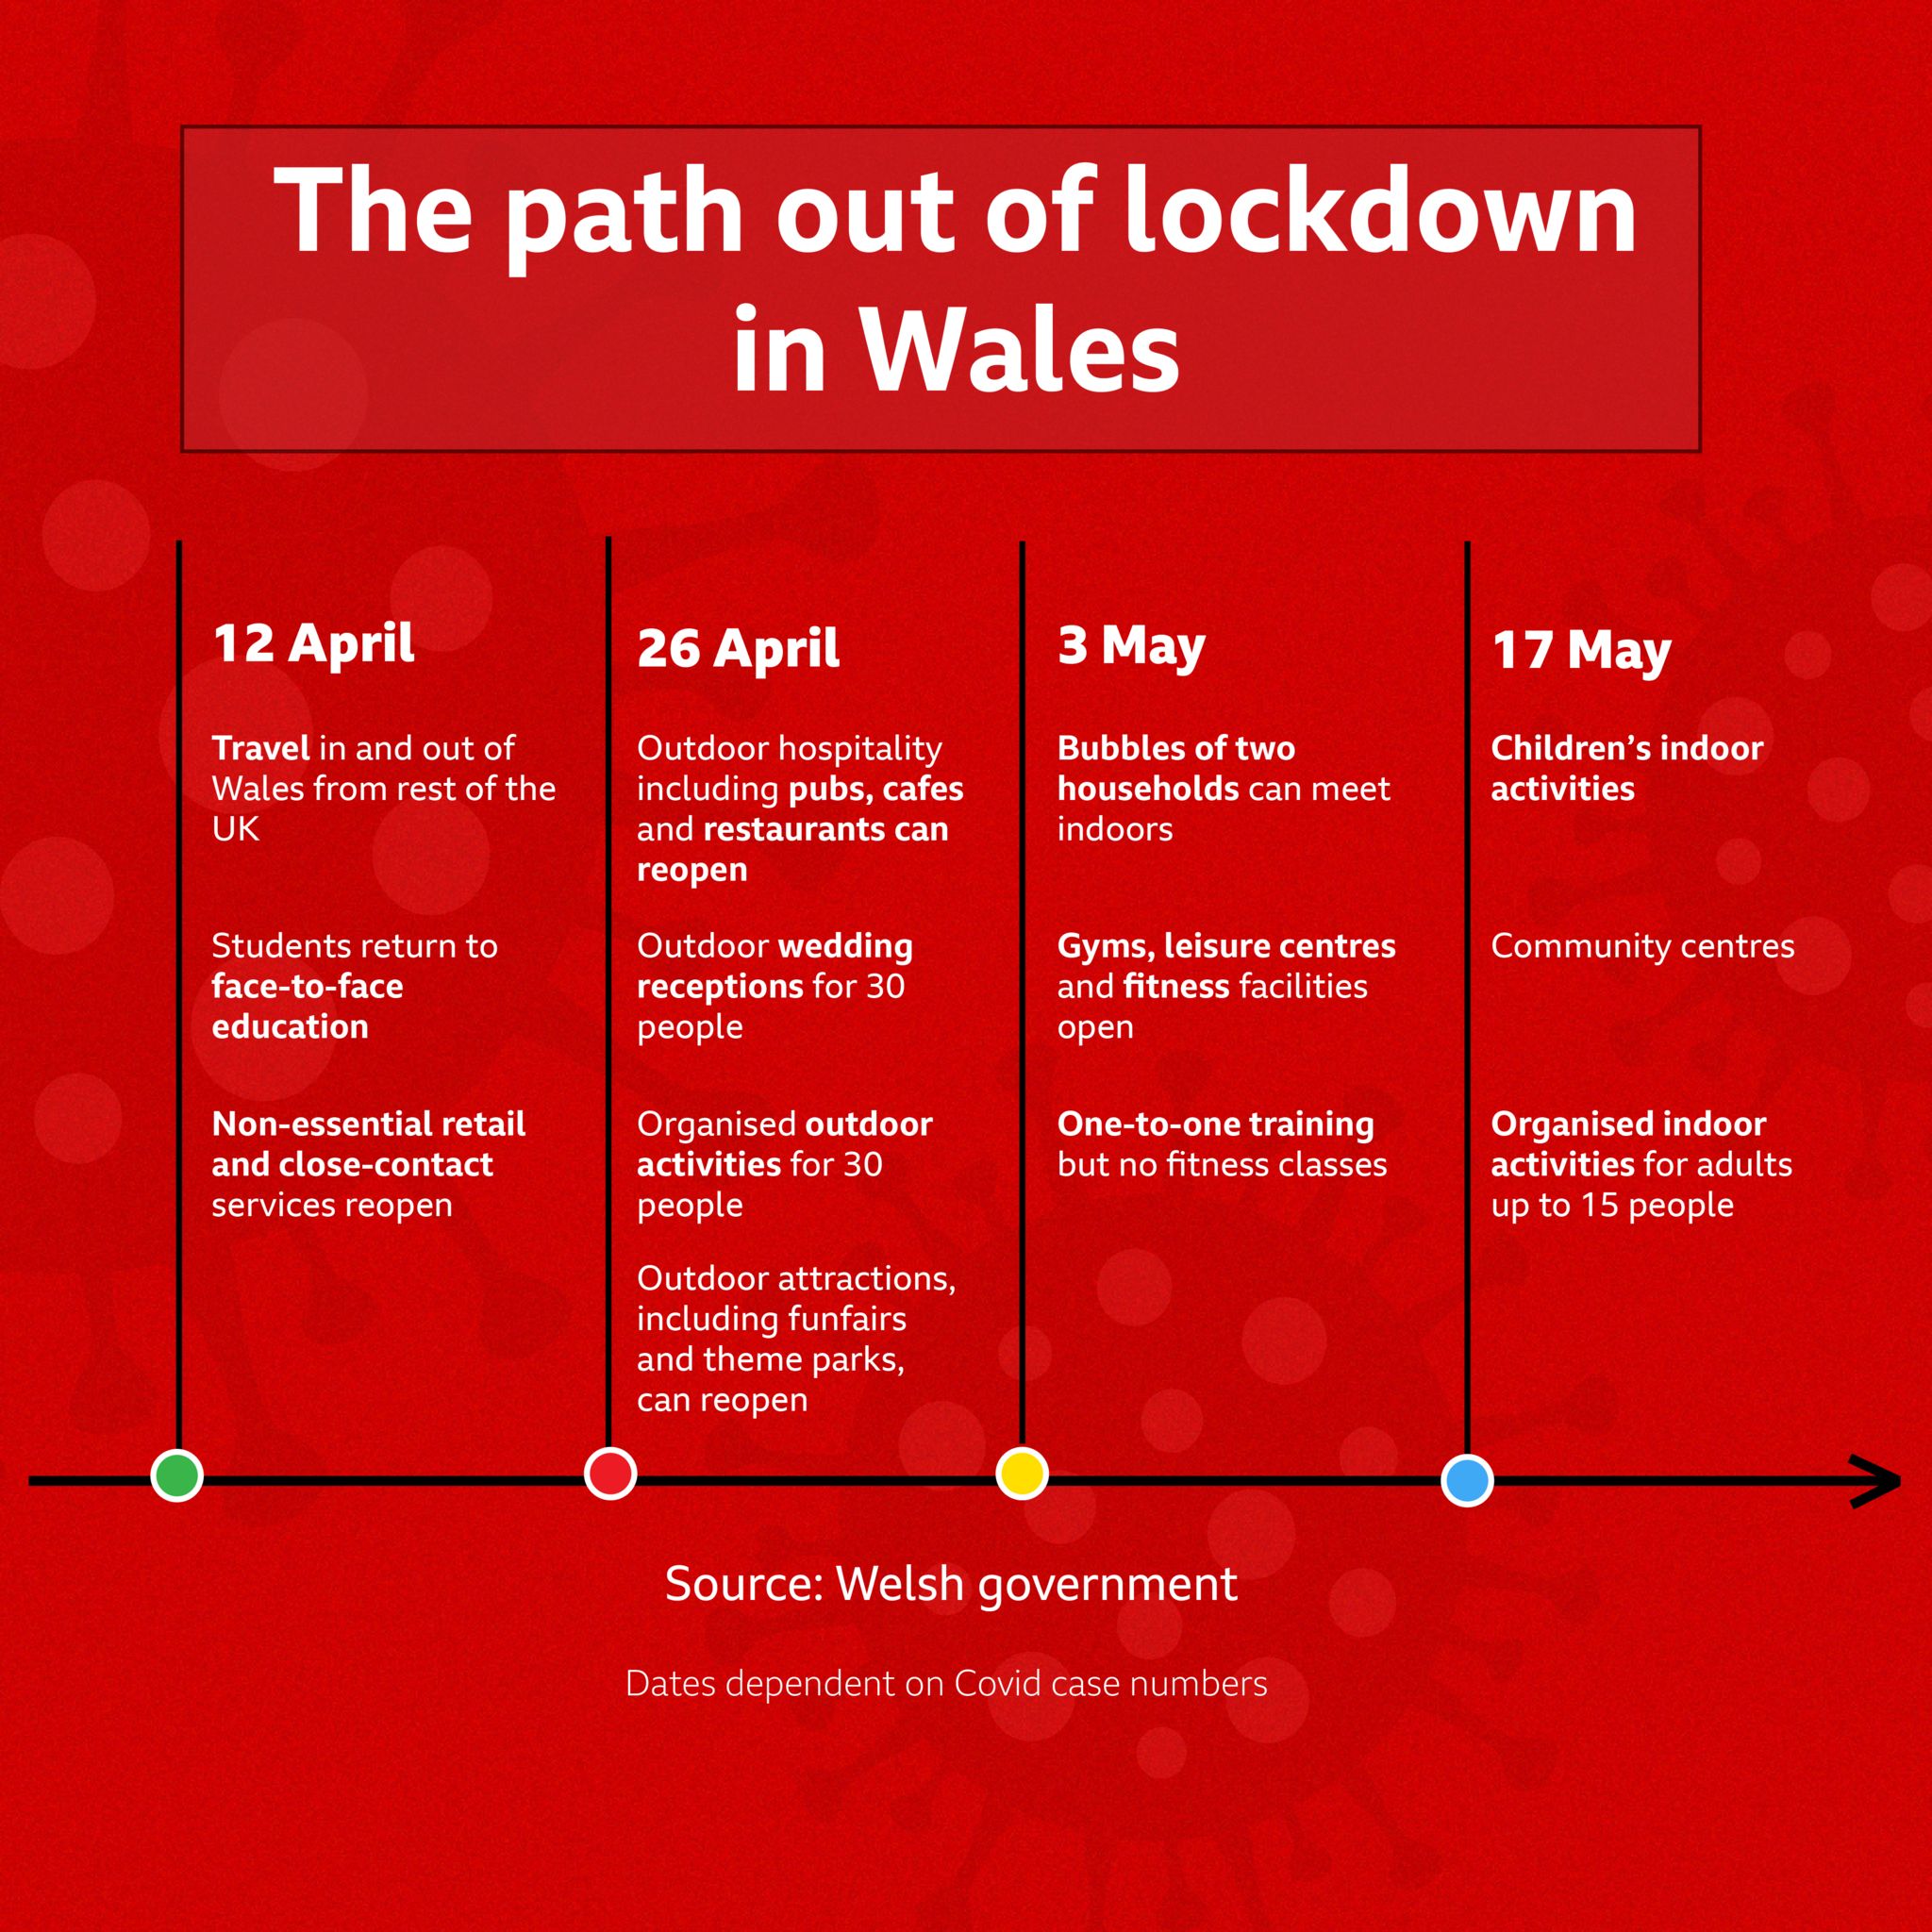 The path out of lockdown in Wales